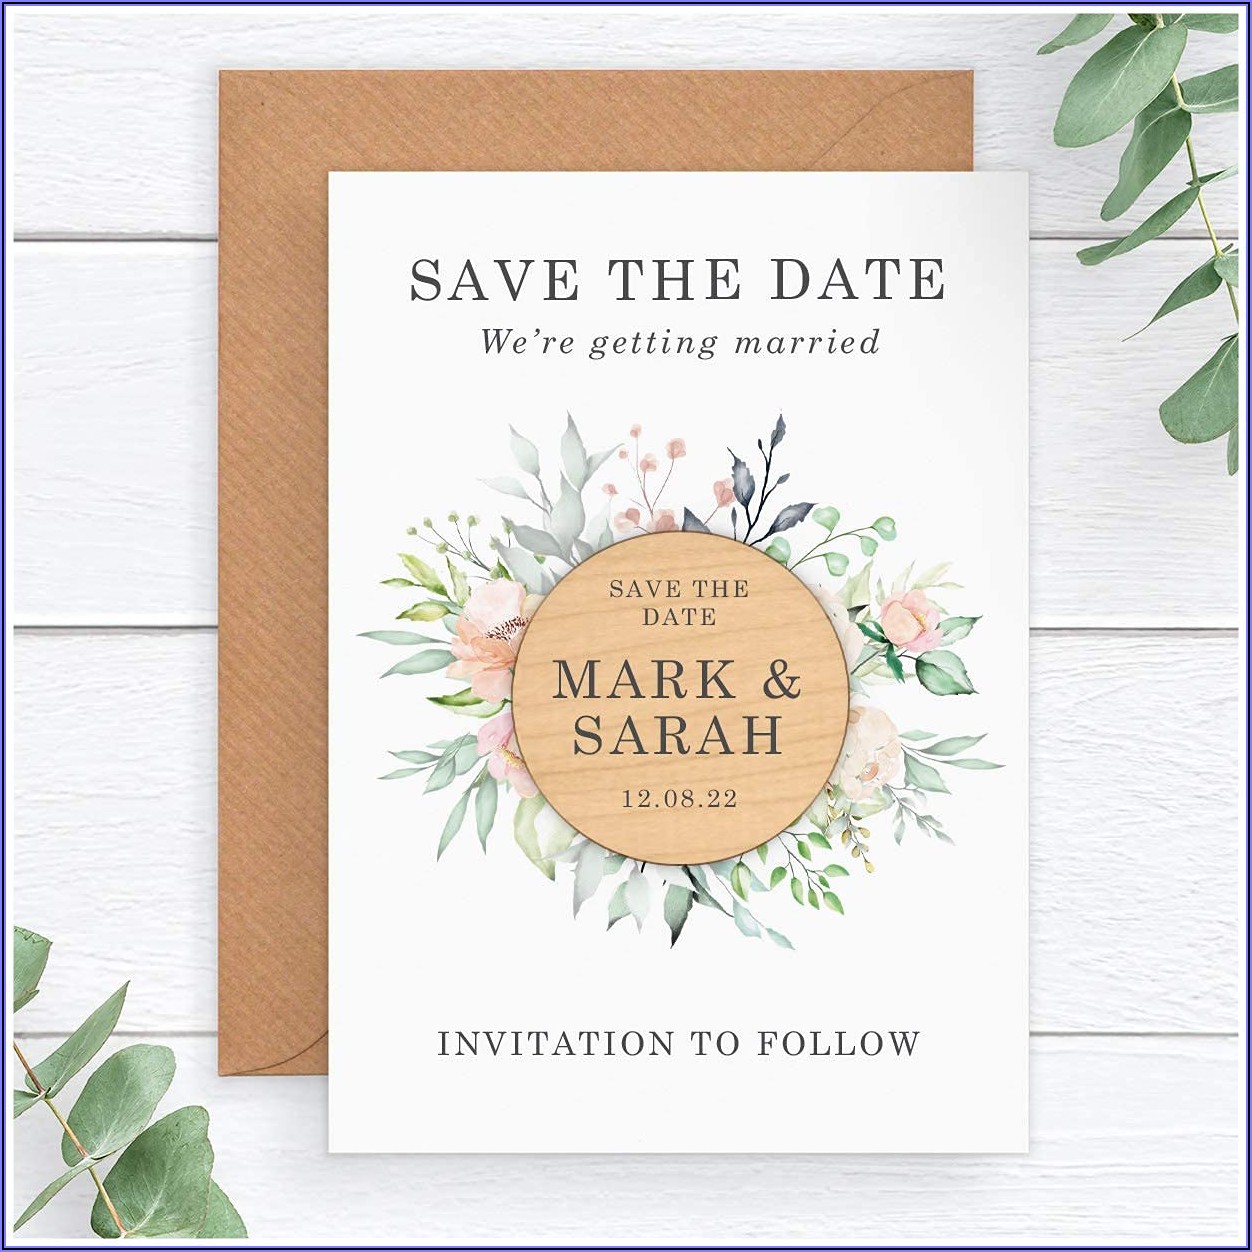 Save The Date Magnets And Envelopes